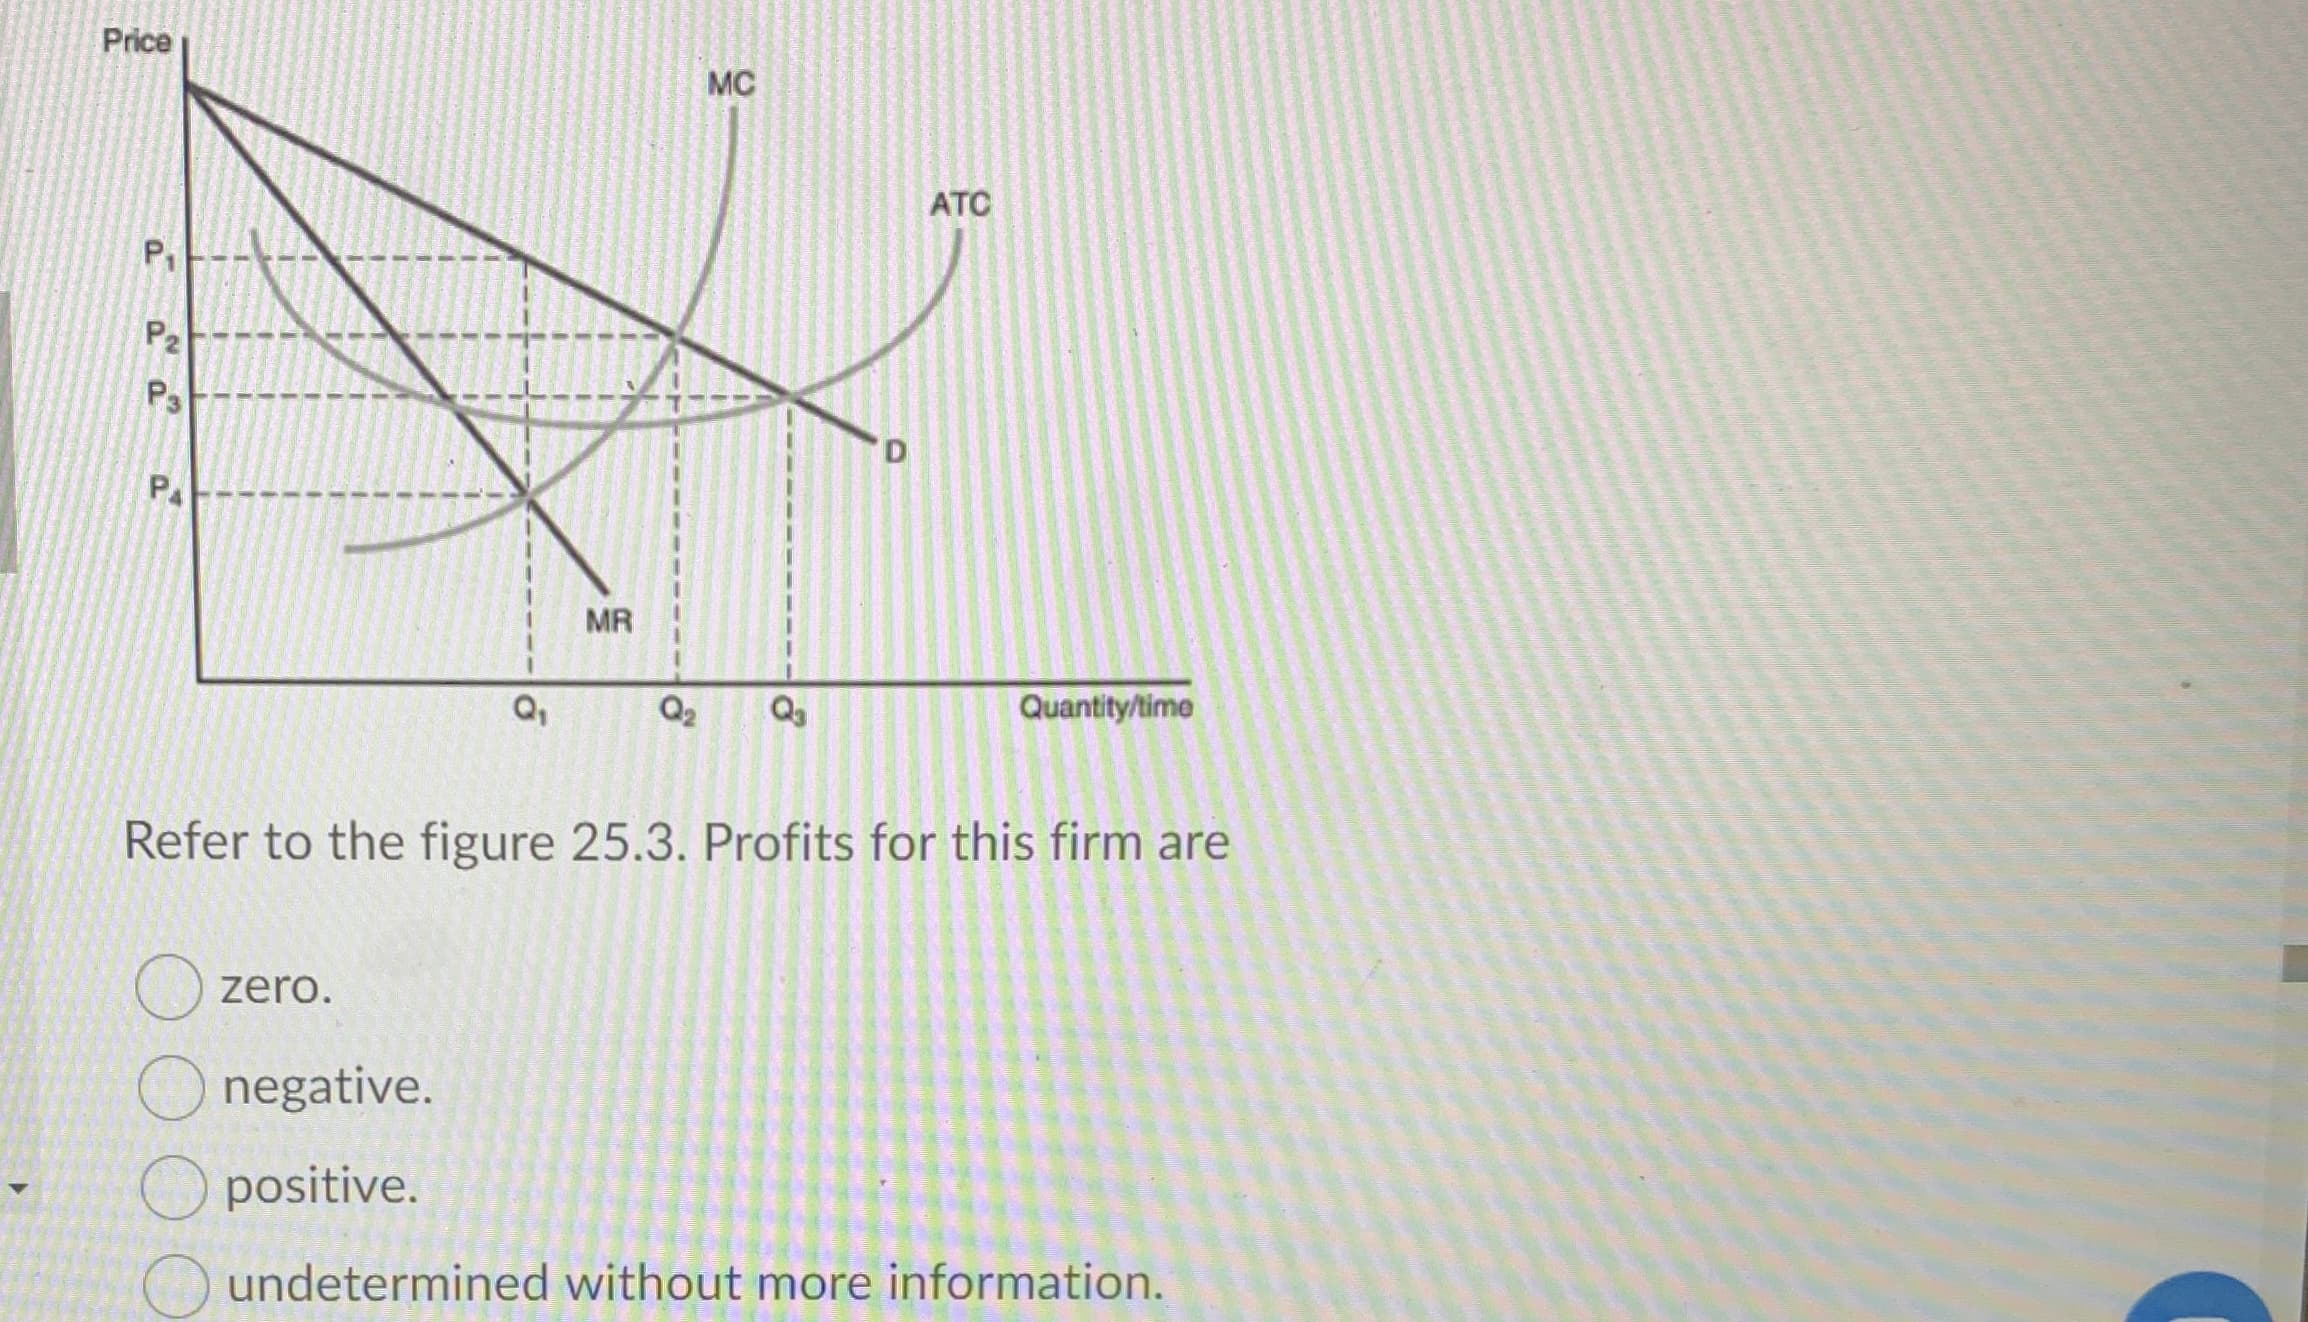 Refer to the figure 25.3. Profits for this firm are
zero.
O negative.
positive.
undetermined without more information.
